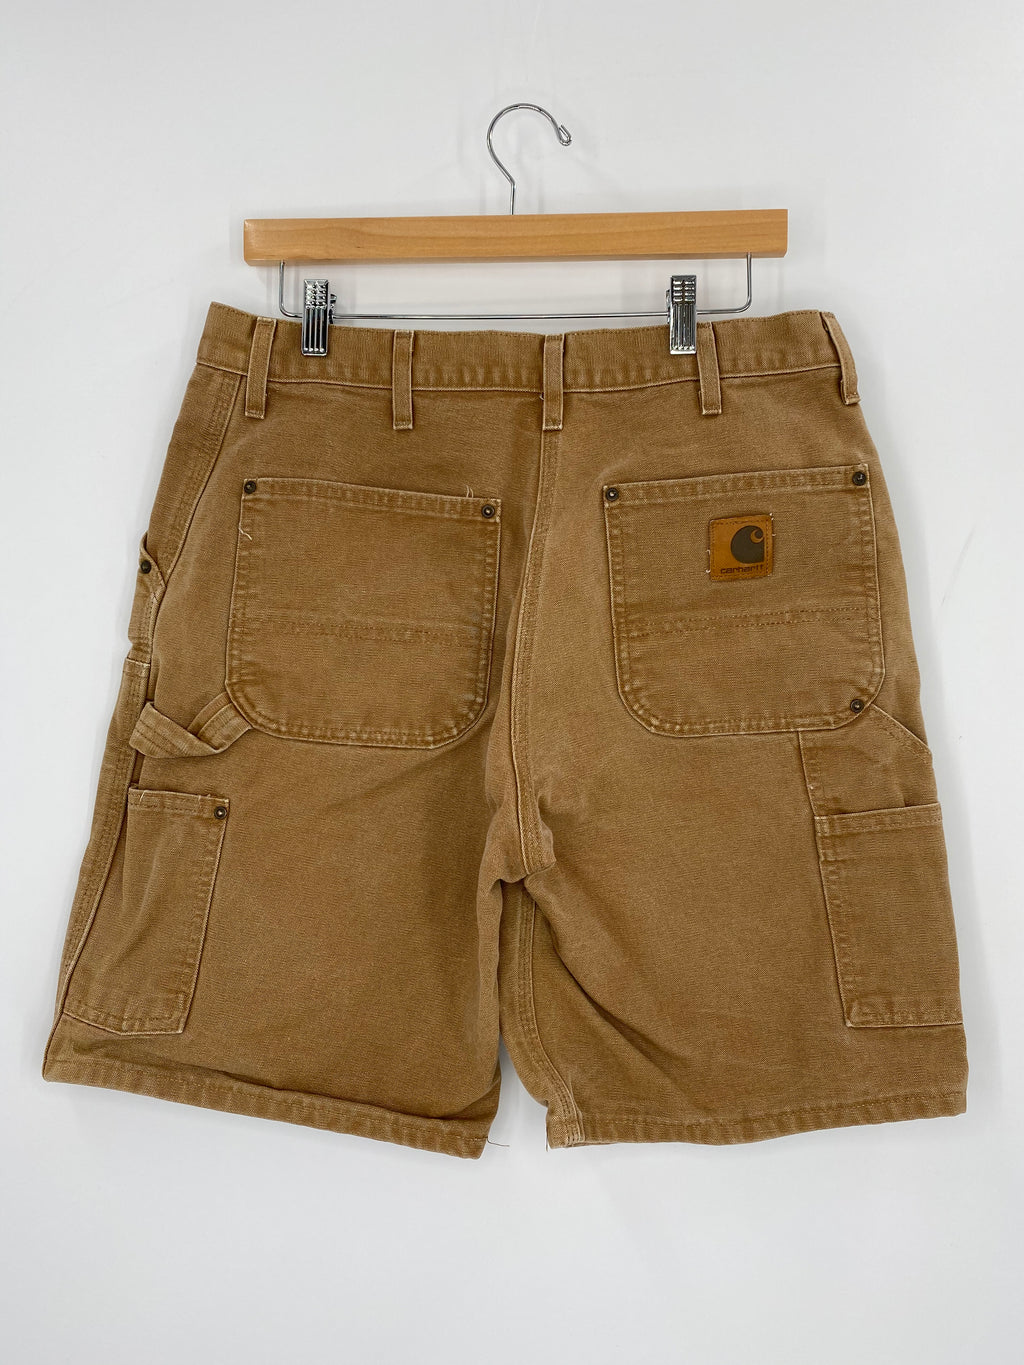 CARHARTT Made in USA Size W34 Vintage Short-Pants / Y138